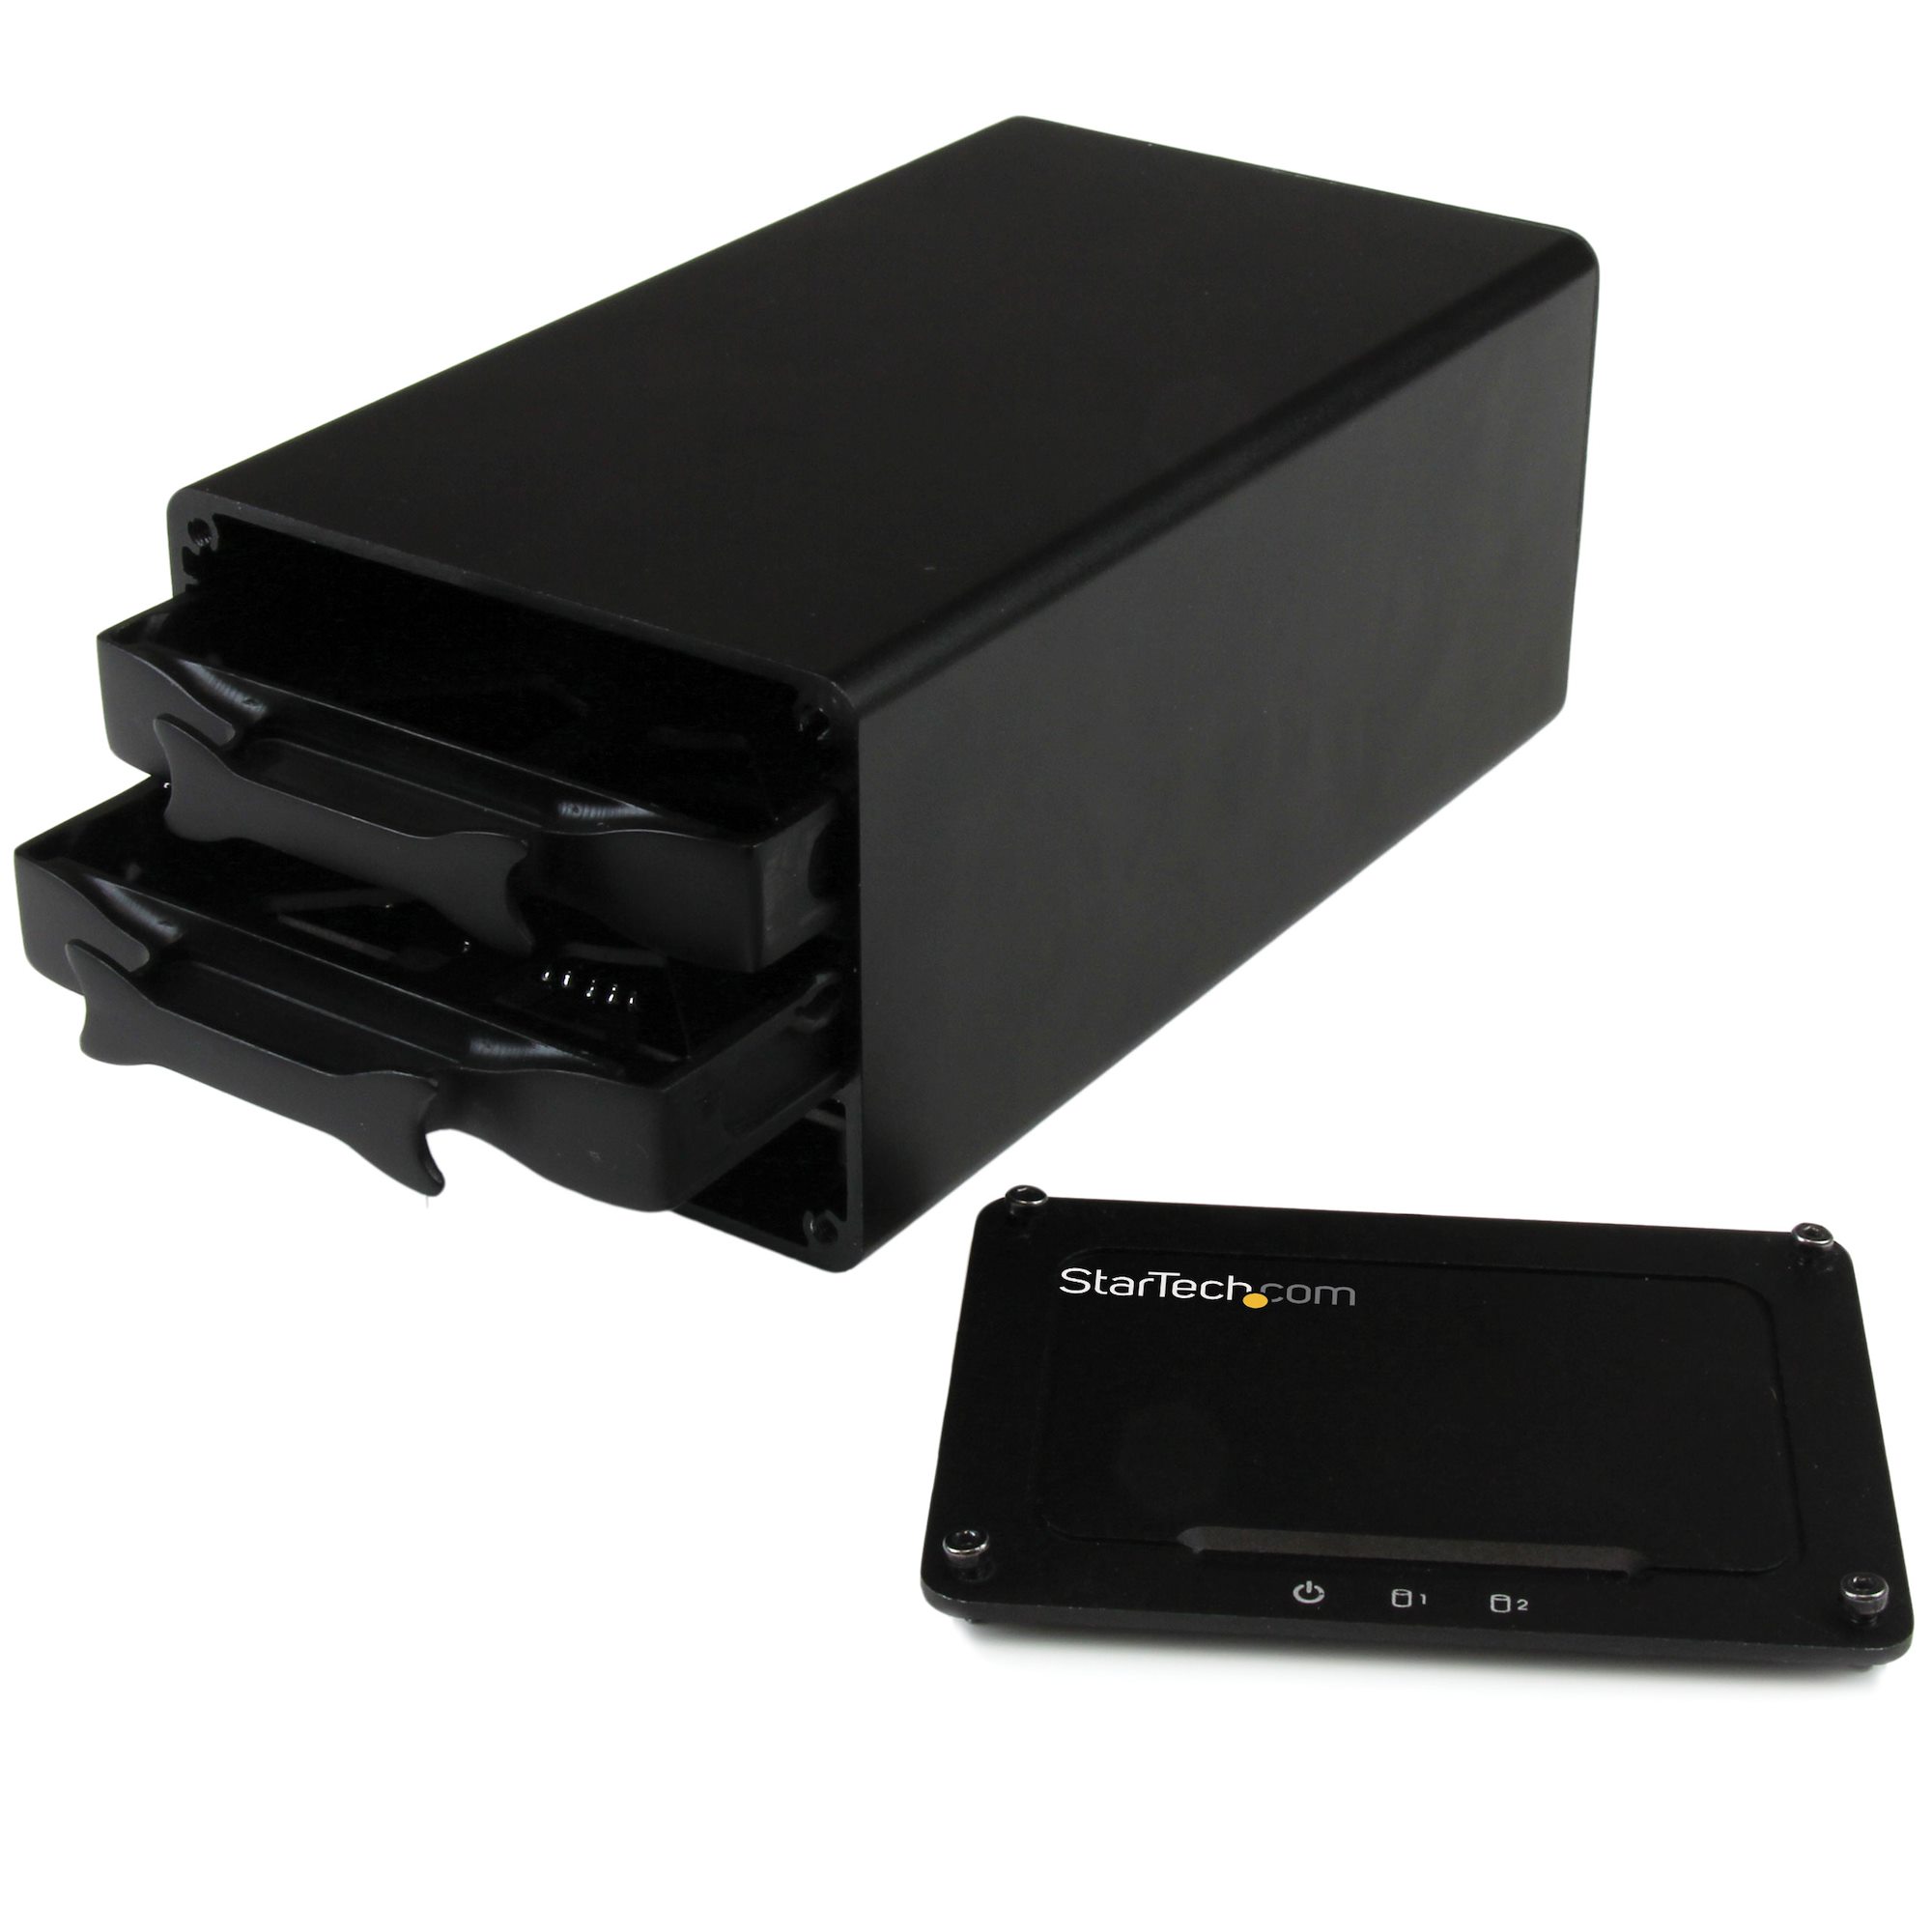 USB 3.1 (10Gbps) External Enclosure for Dual 2.5